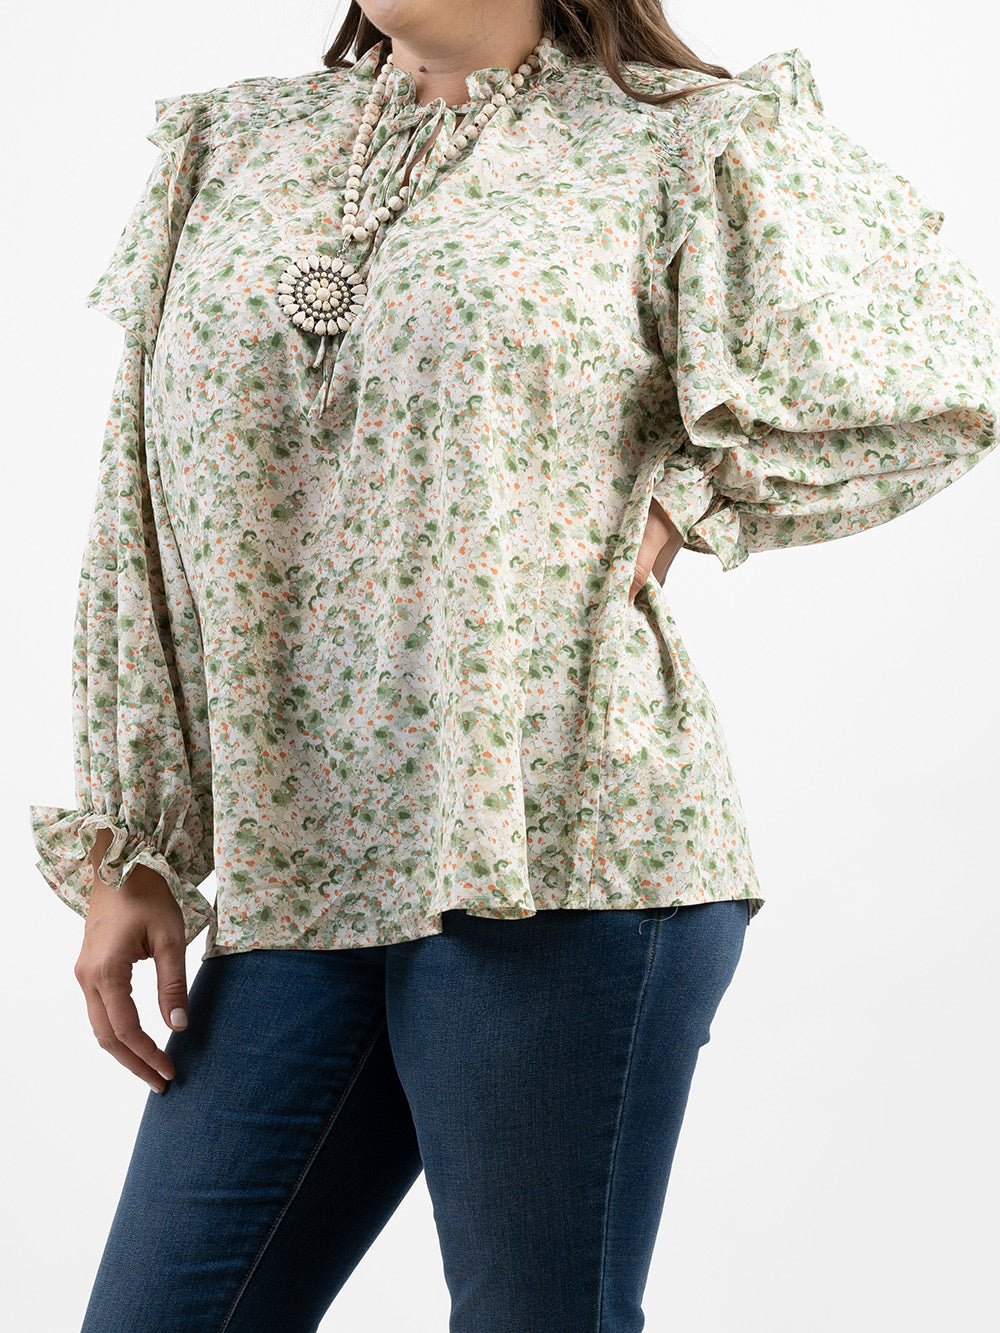 Plus Size Women Floral Print Tie Shirred Blouse - Cowgirl Wear